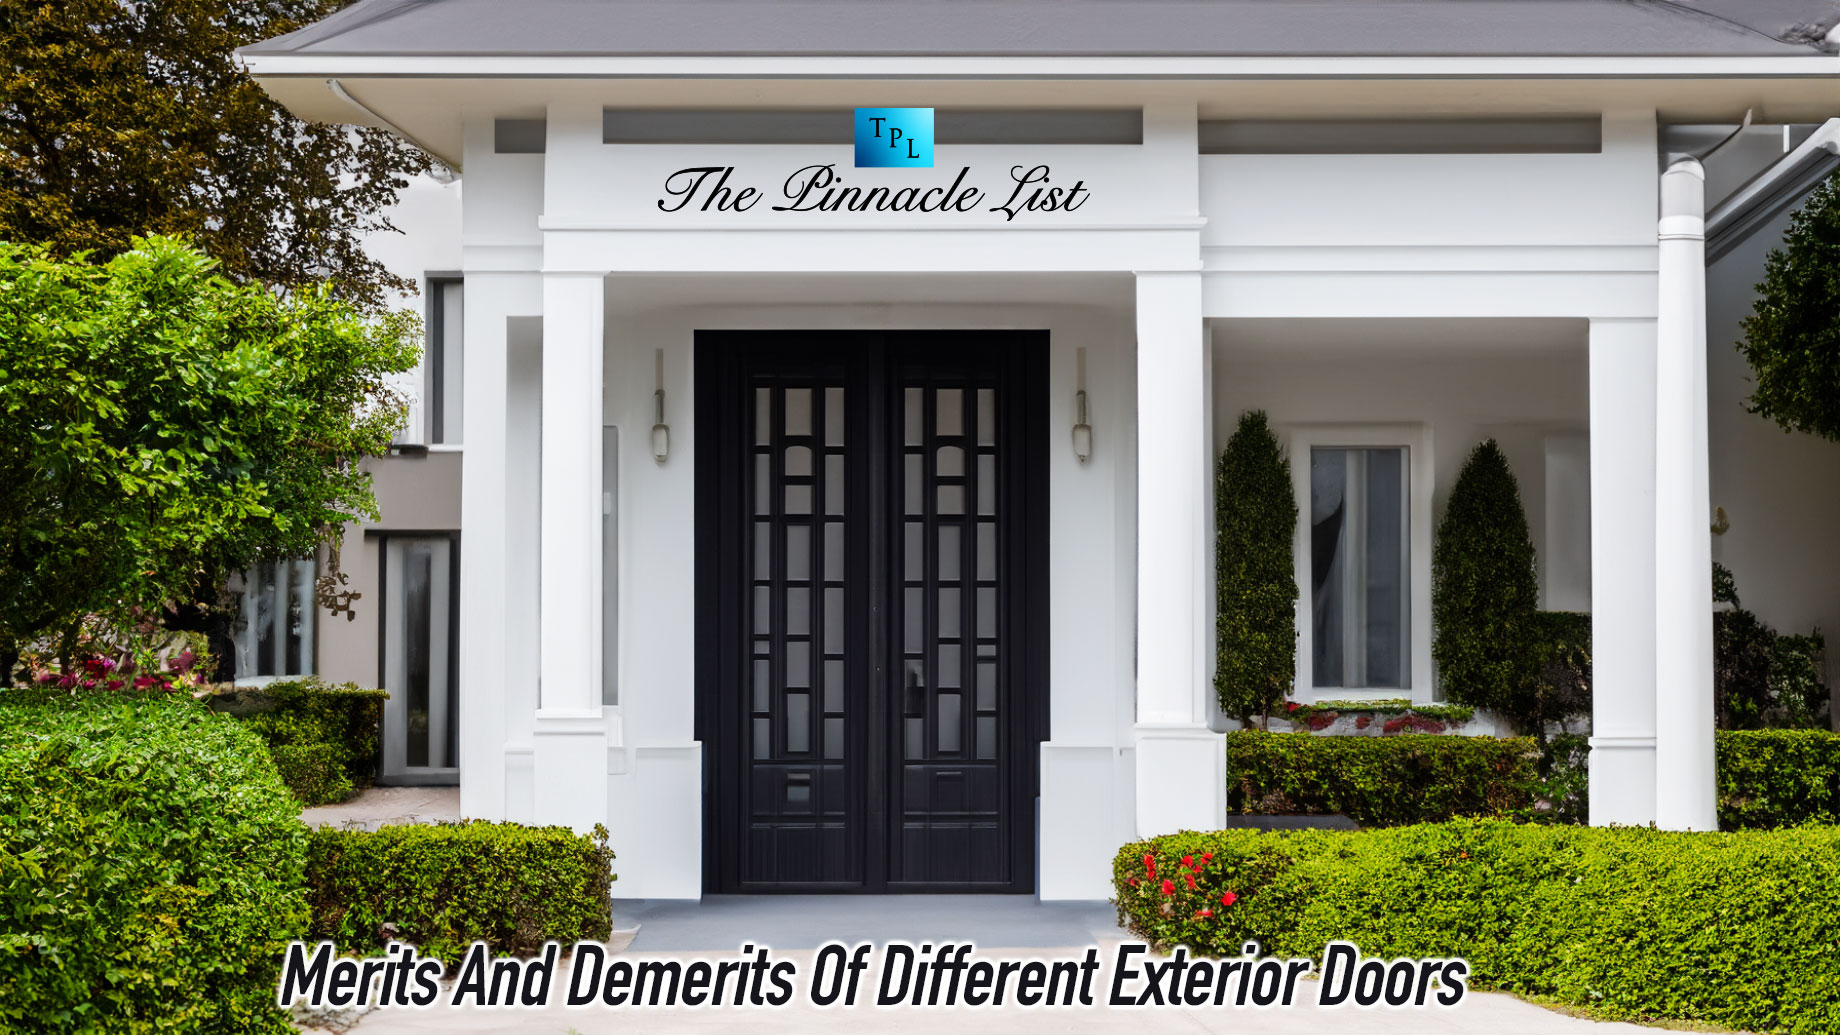 Merits And Demerits Of Different Exterior Doors